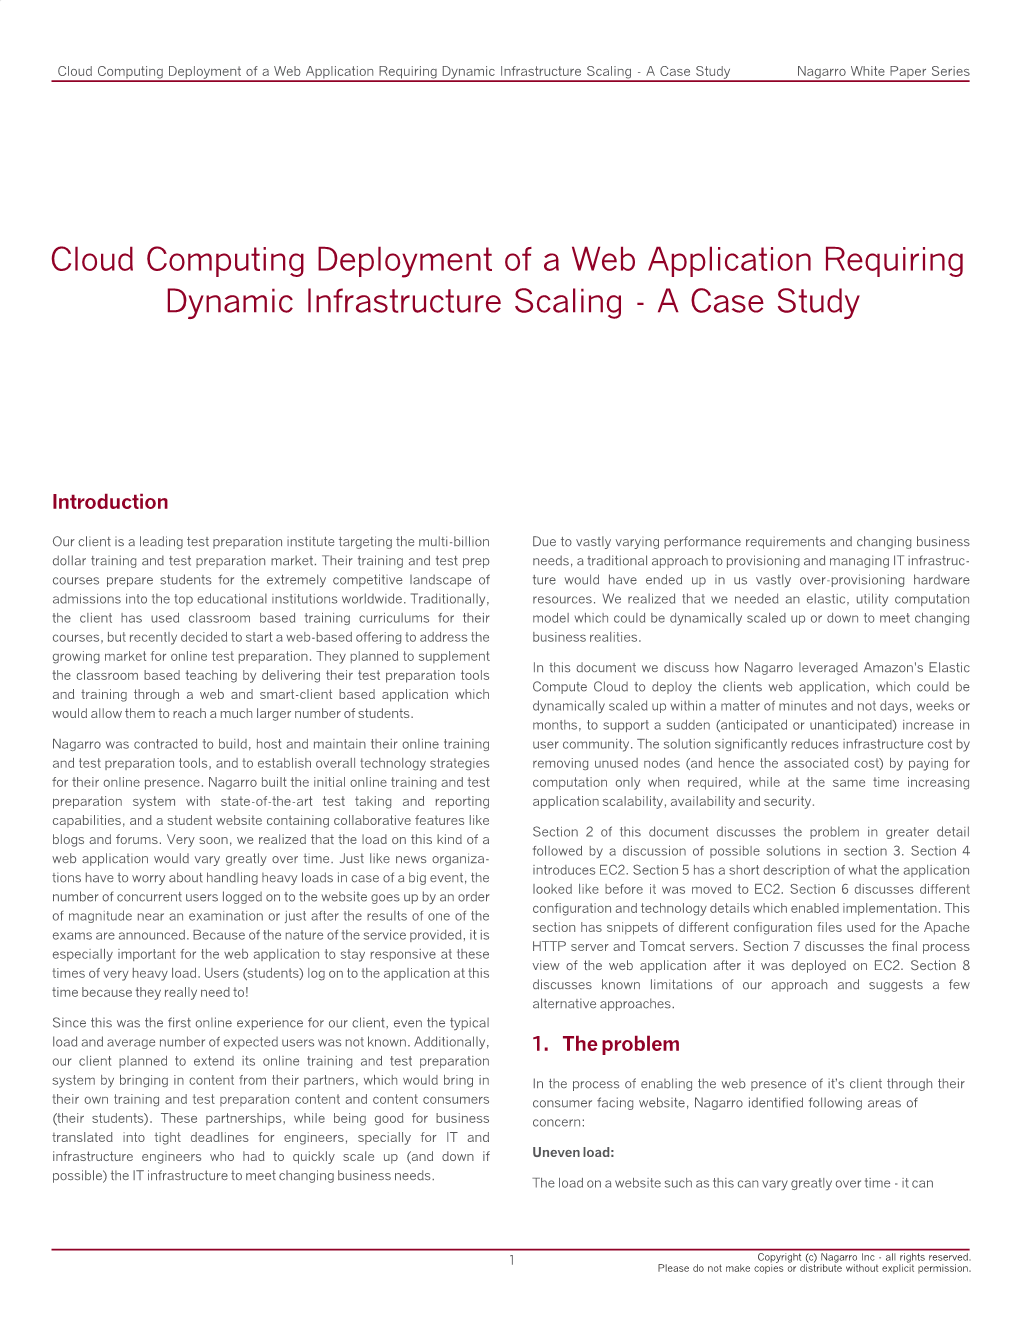 Cloud Computing Deployment of a Web Application Requiring Dynamic Infrastructure Scaling - a Case Study Nagarro White Paper Series